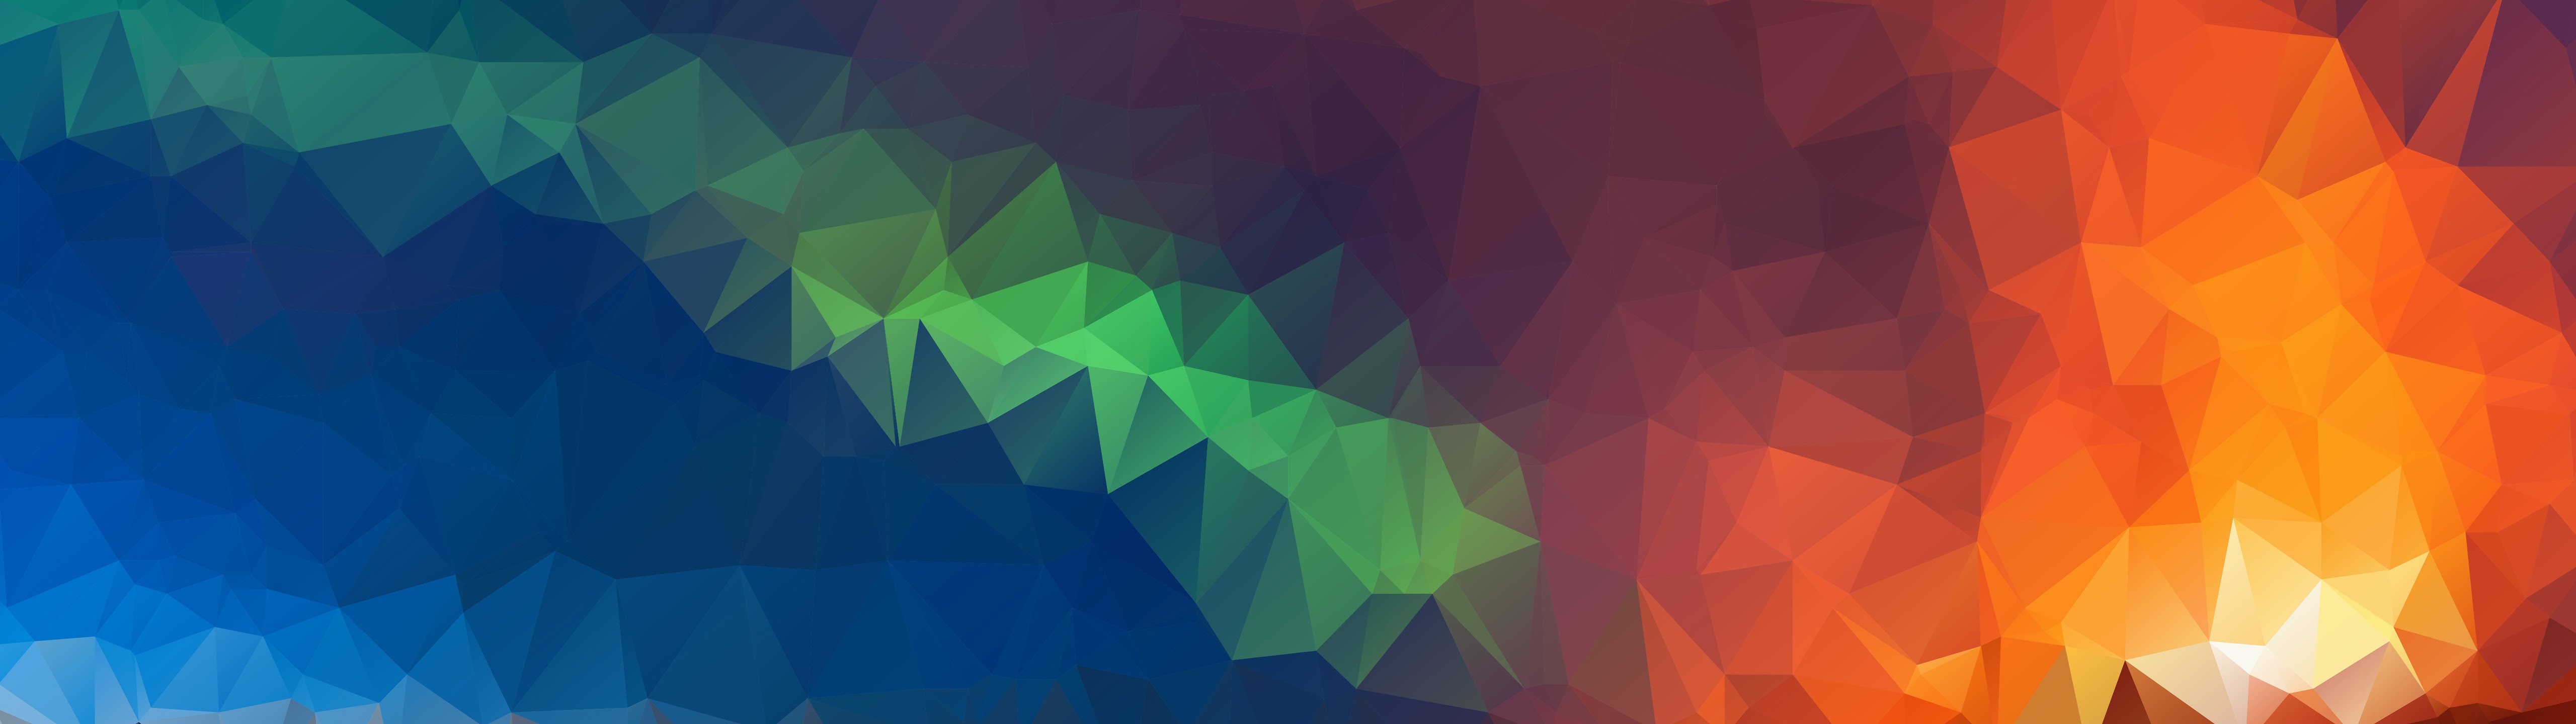 Abstract, Colorful, Polygon, 8k, 7680x4320, - 5120 X 1440 Wallpaper